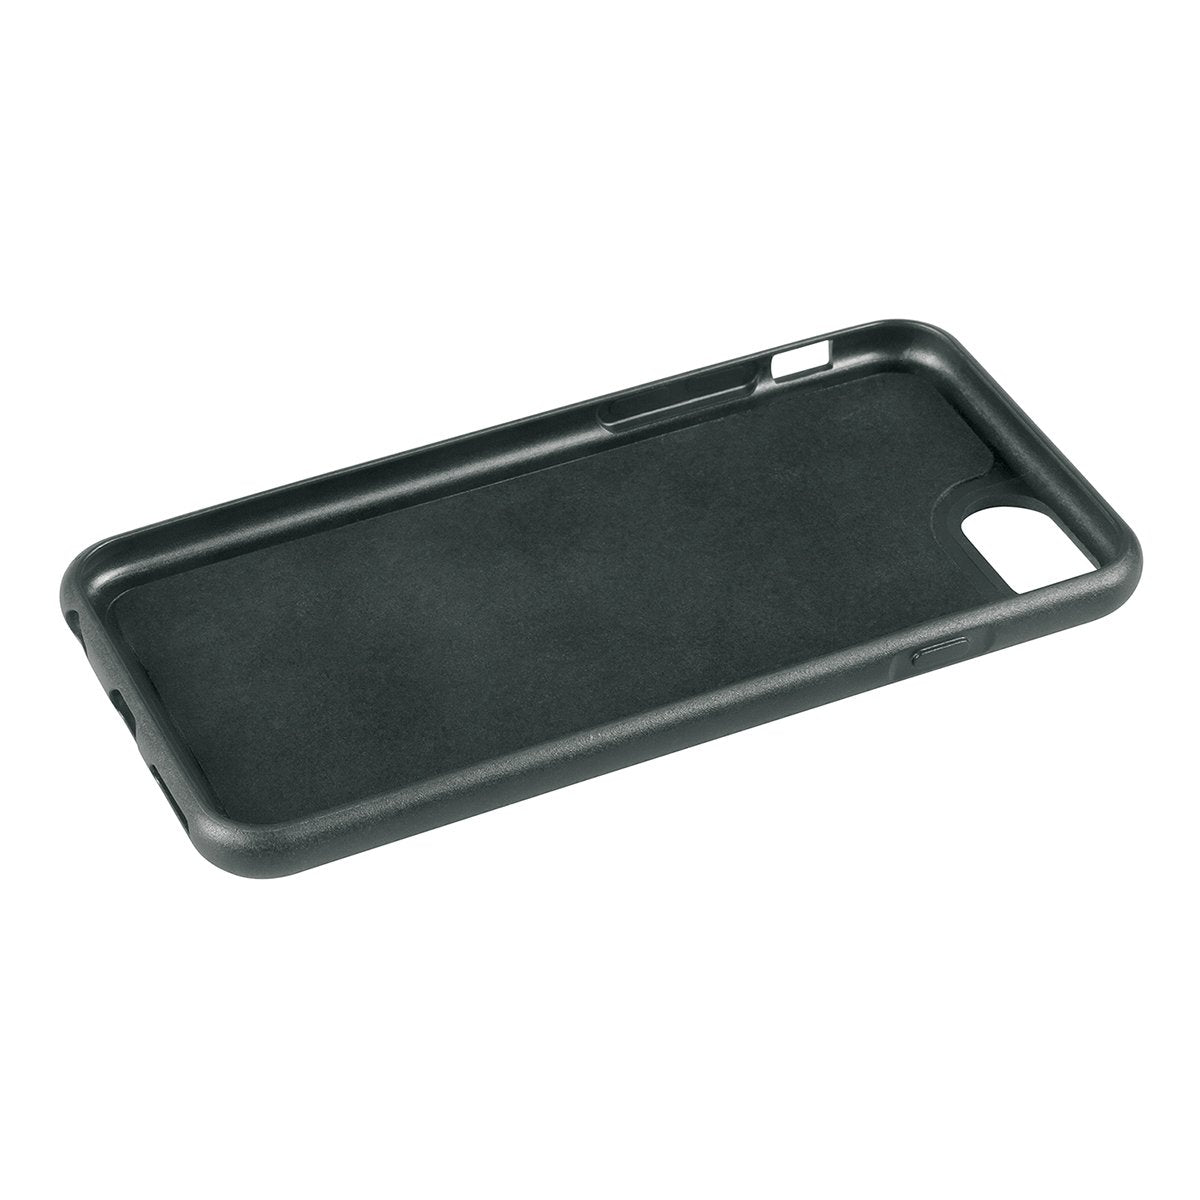 SKS - Compit/E Bundle (E-Phone Holder with Phone Cover)